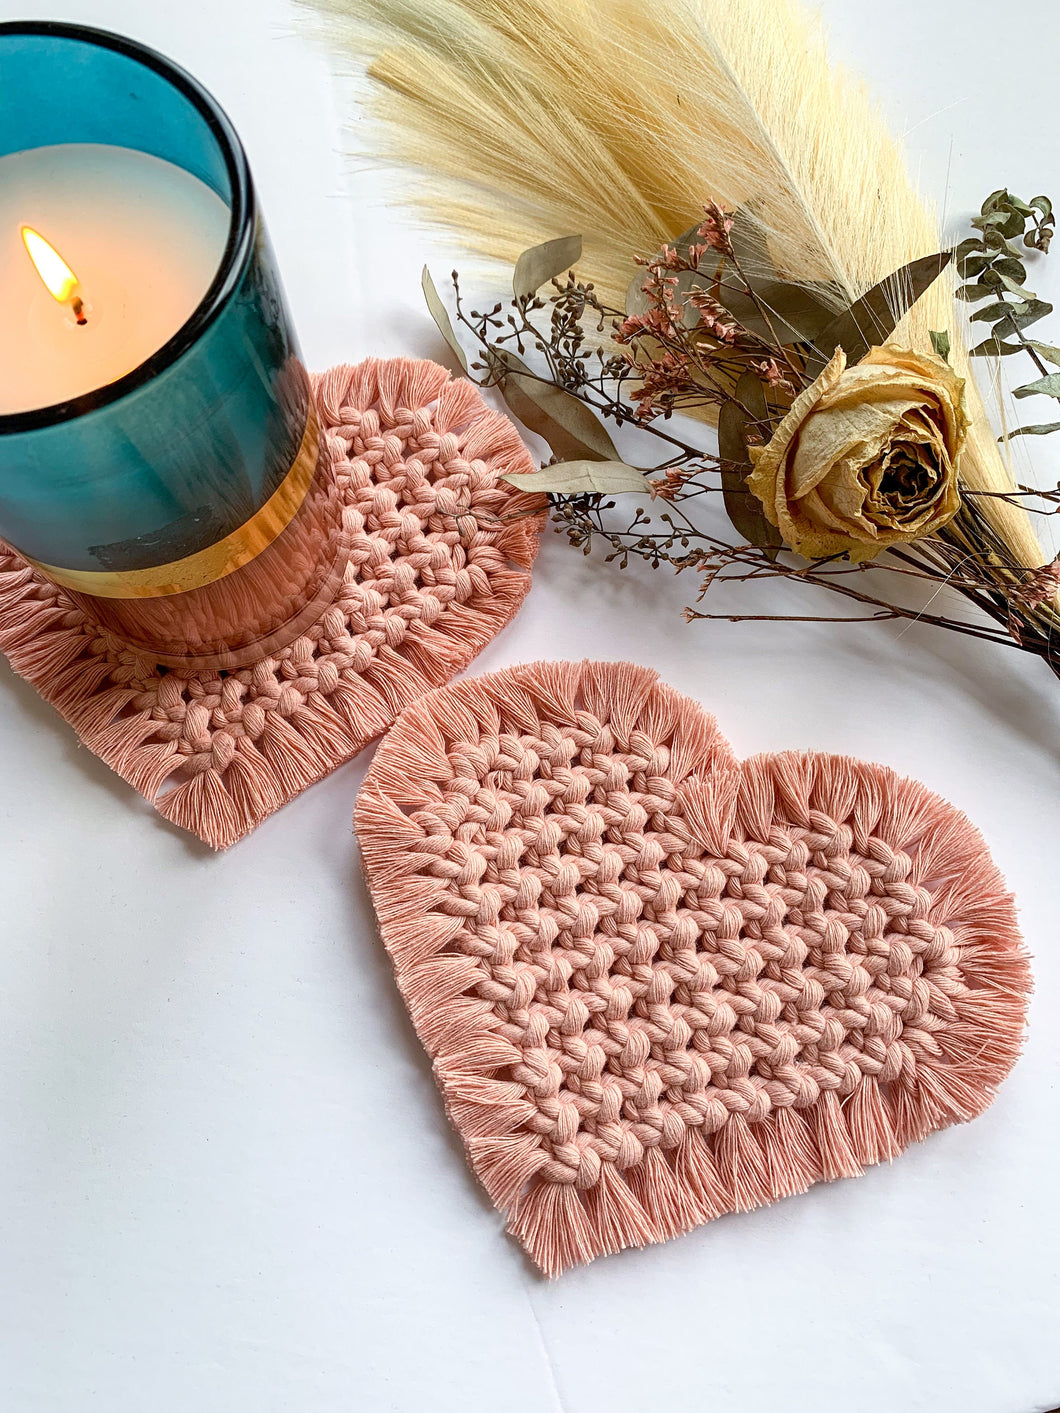 Large Macrame Heart Coaster | Placemat | Vday Decor | Galentine's